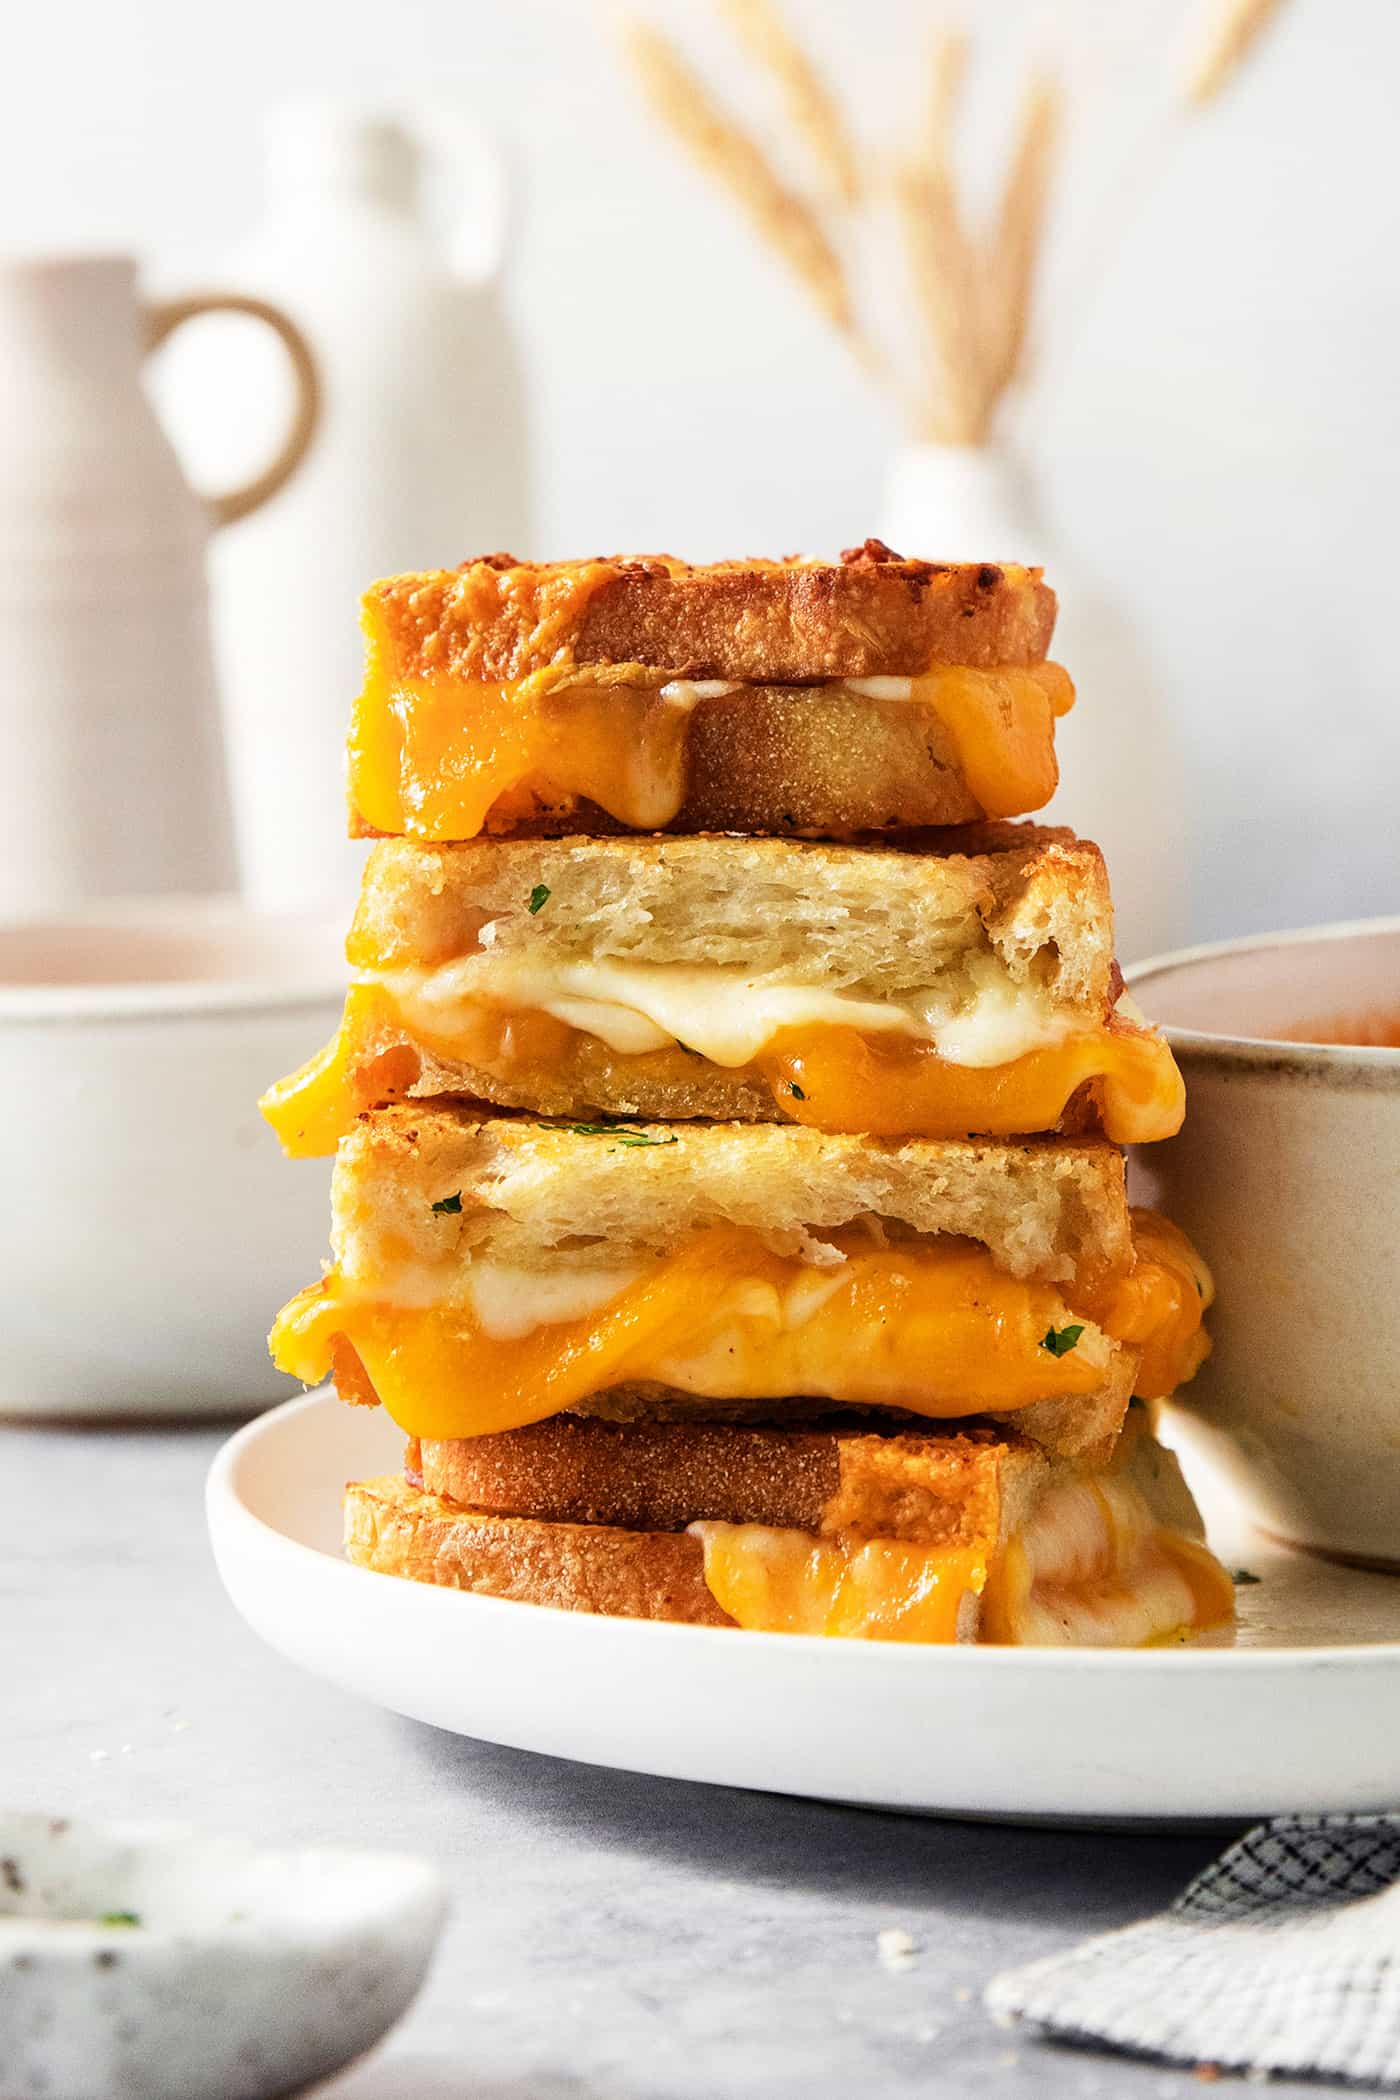 A stack of slices of air fryer grilled cheese sandwiches shows the melted cheese inside.